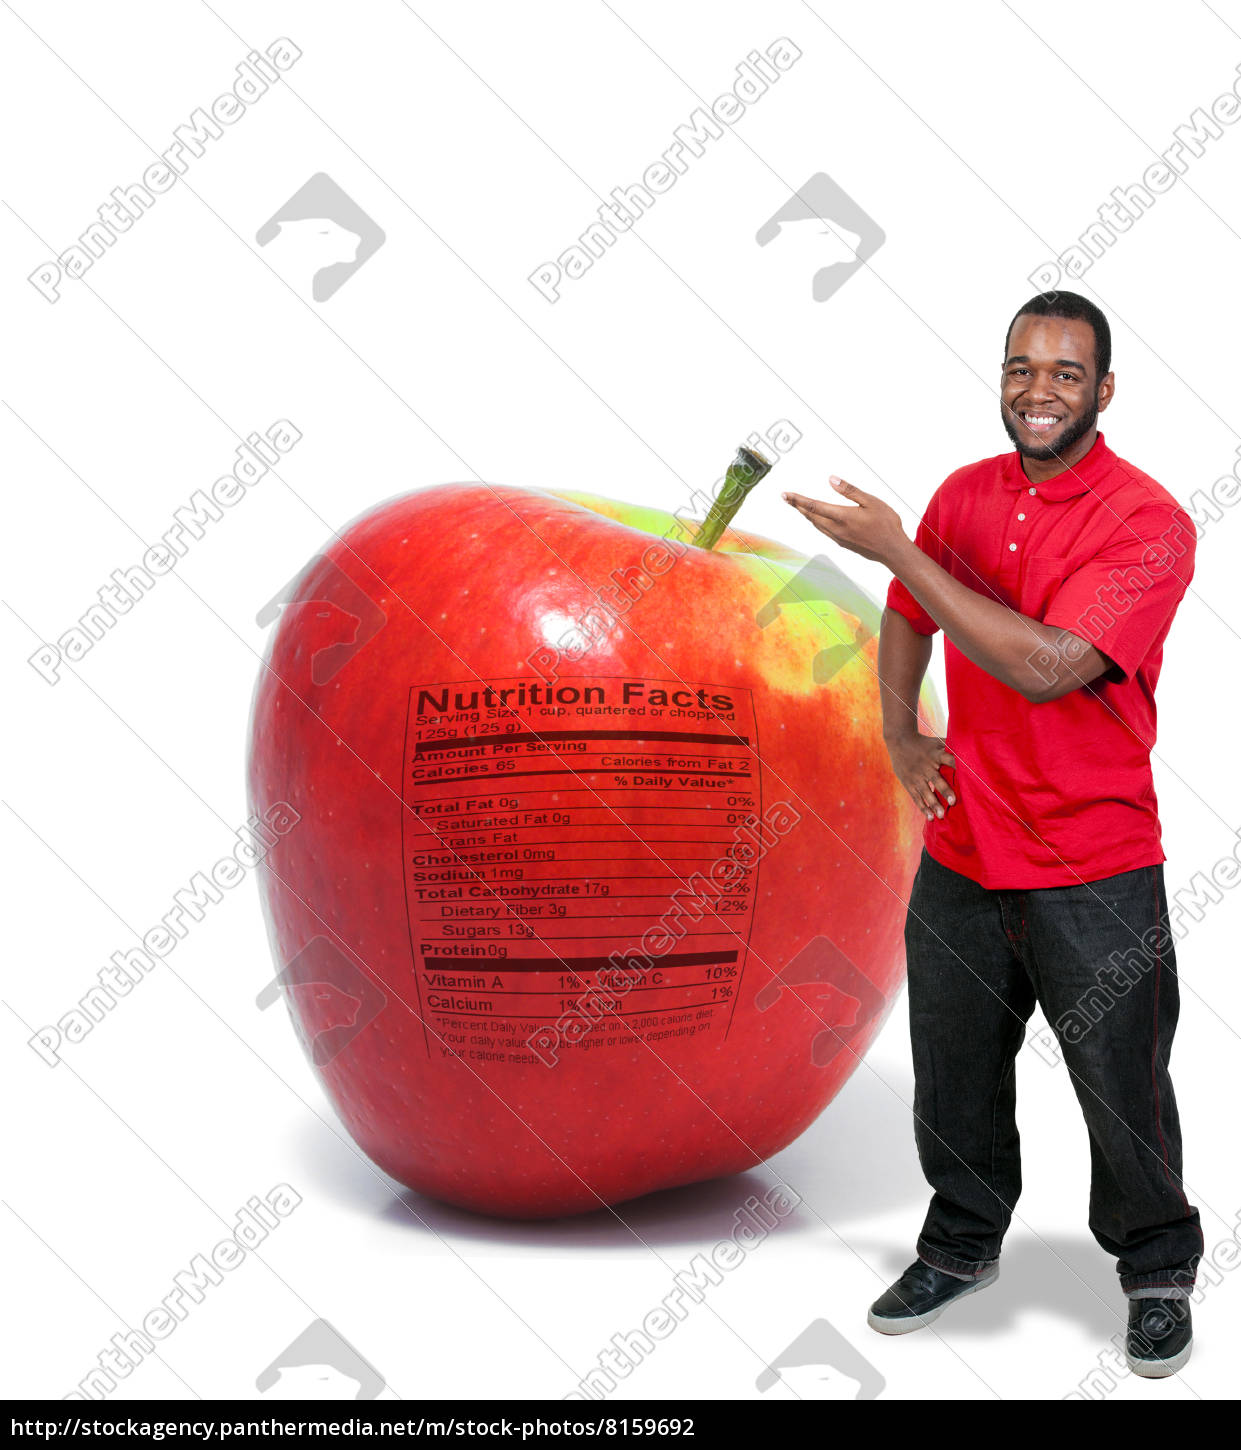 How Many Calories Are in a Red Delicous Apple?